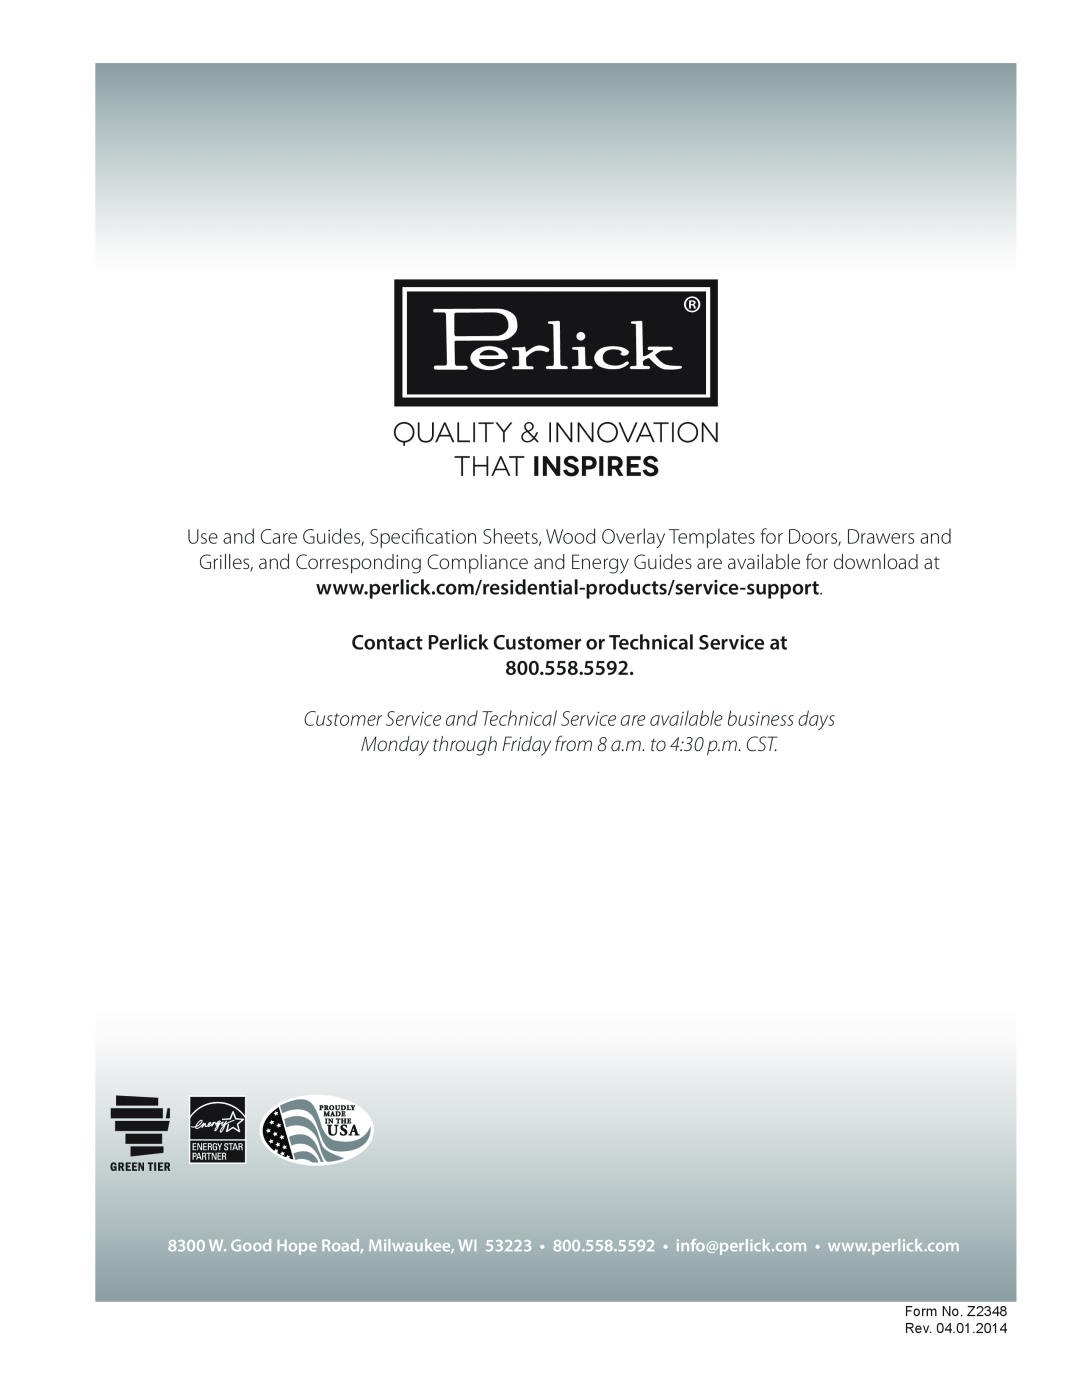 Perlick HC24, HH24 Contact Perlick Customer or Technical Service at, Monday through Friday from 8 a.m. to 430 p.m. CST 